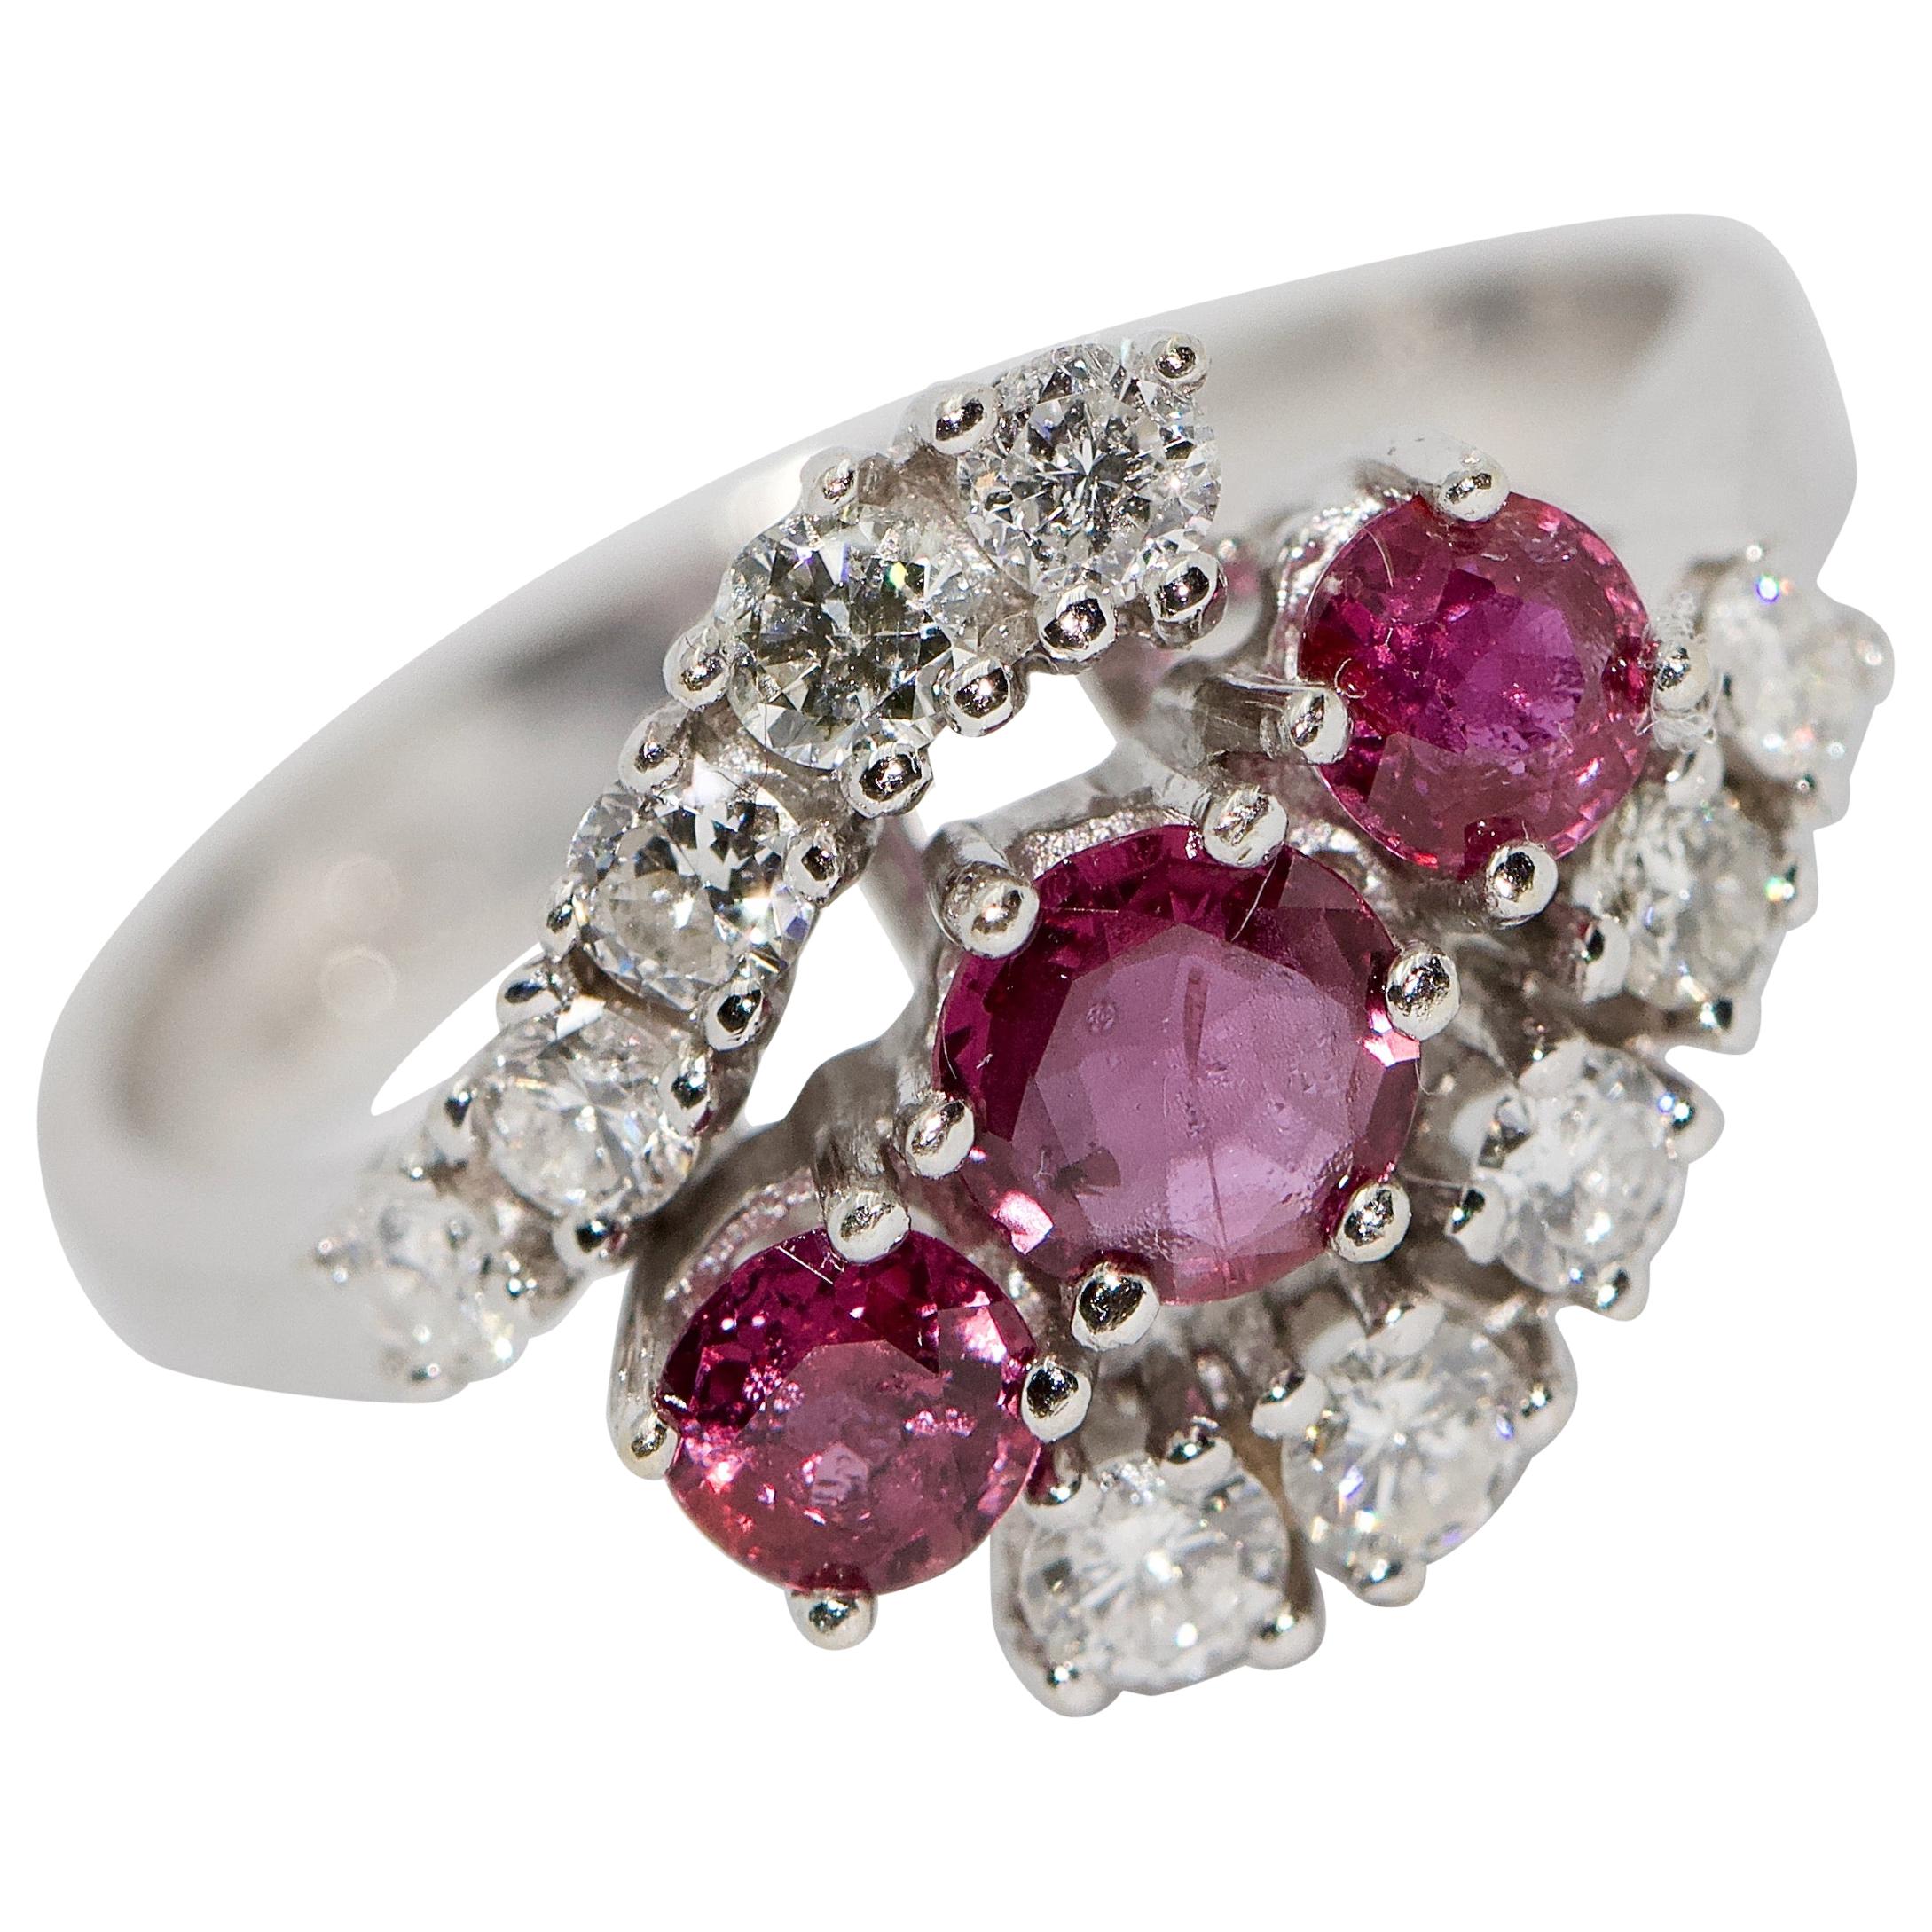 Ladies White Gold Ring with Rubies and Diamonds